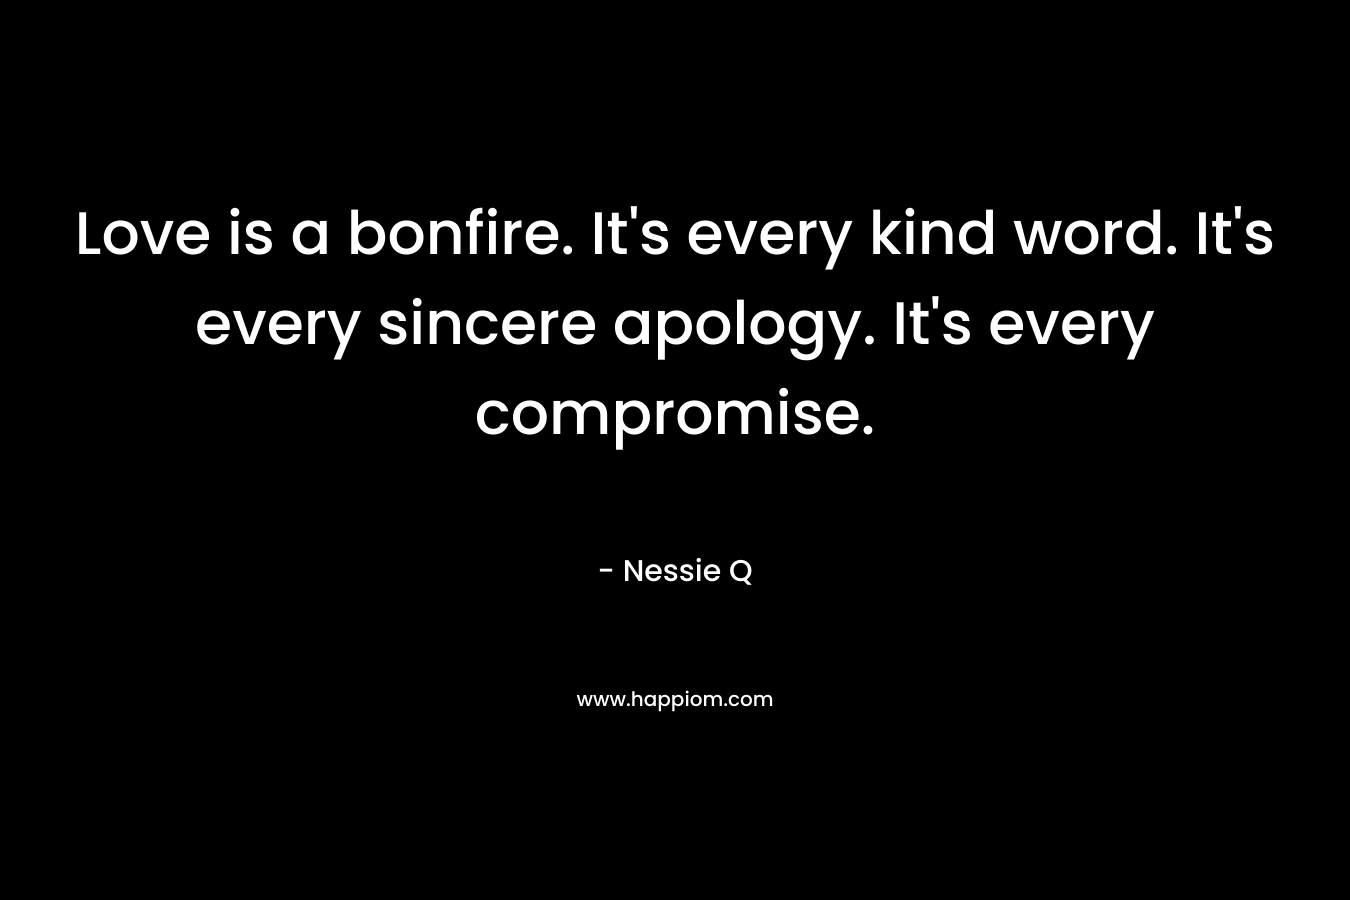 Love is a bonfire. It’s every kind word. It’s every sincere apology. It’s every compromise. – Nessie Q